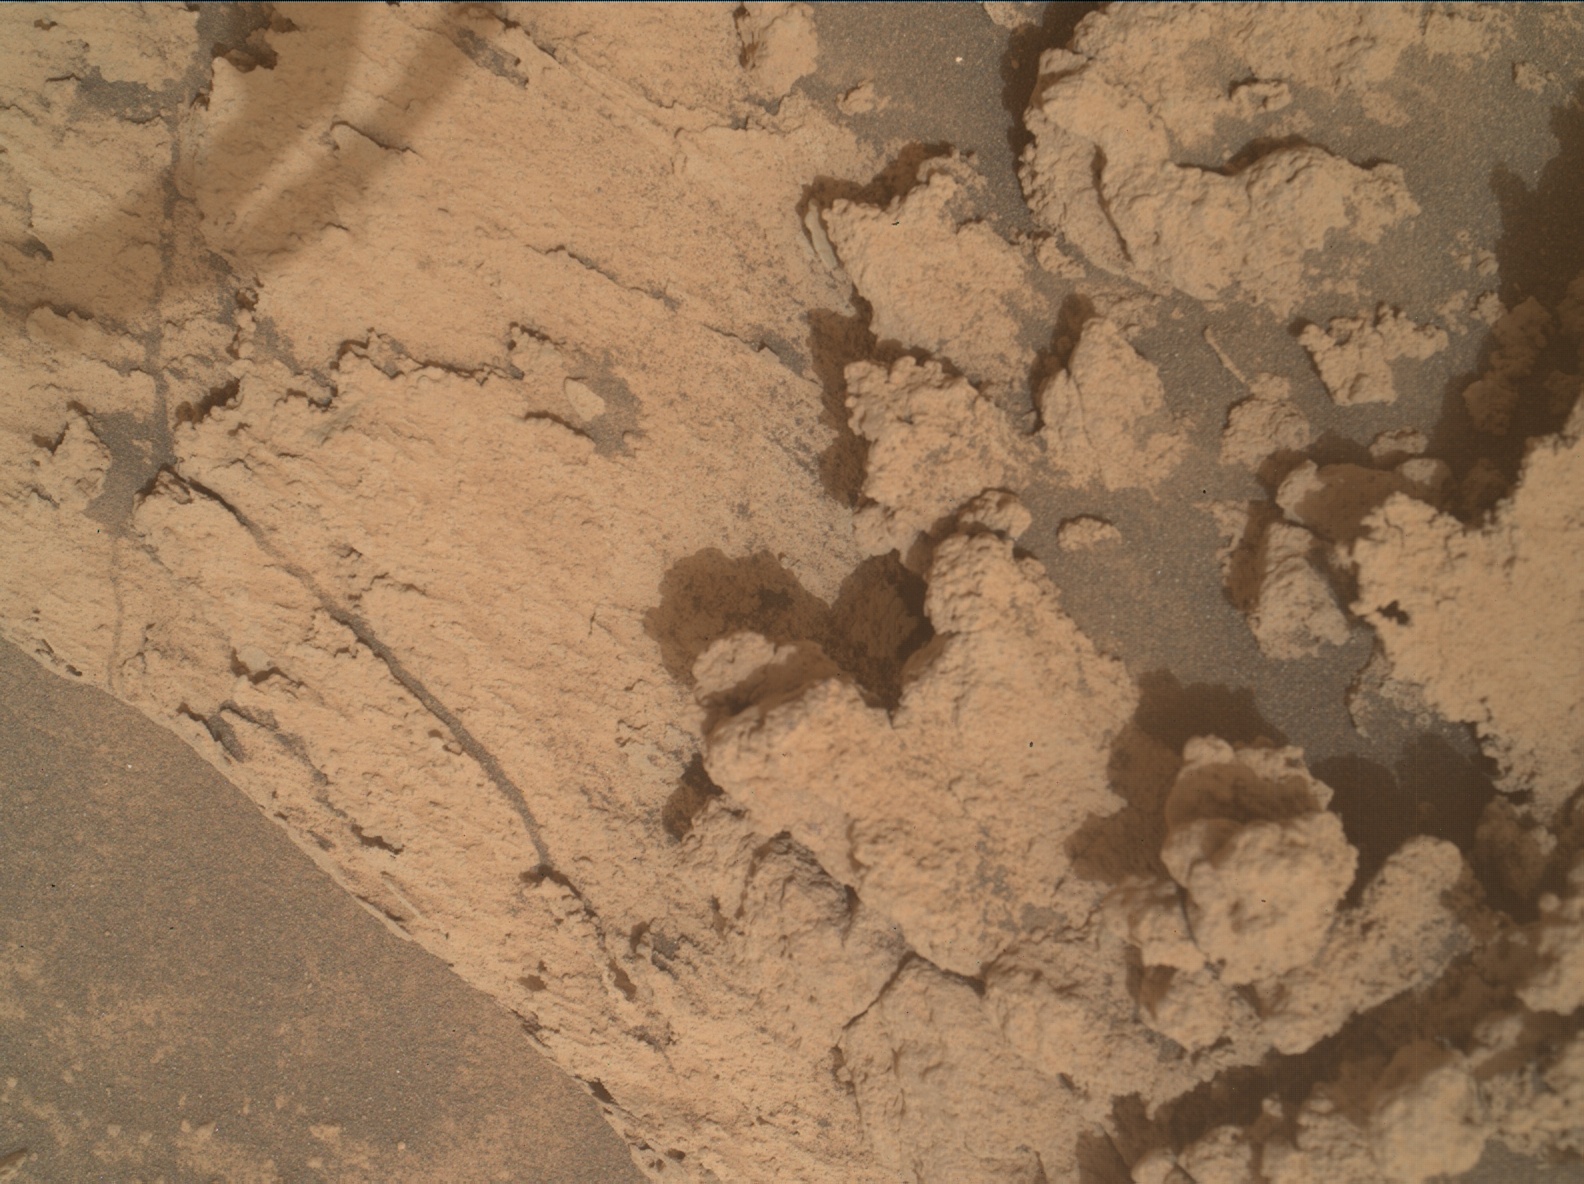 Nasa's Mars rover Curiosity acquired this image using its Mars Hand Lens Imager (MAHLI) on Sol 3485